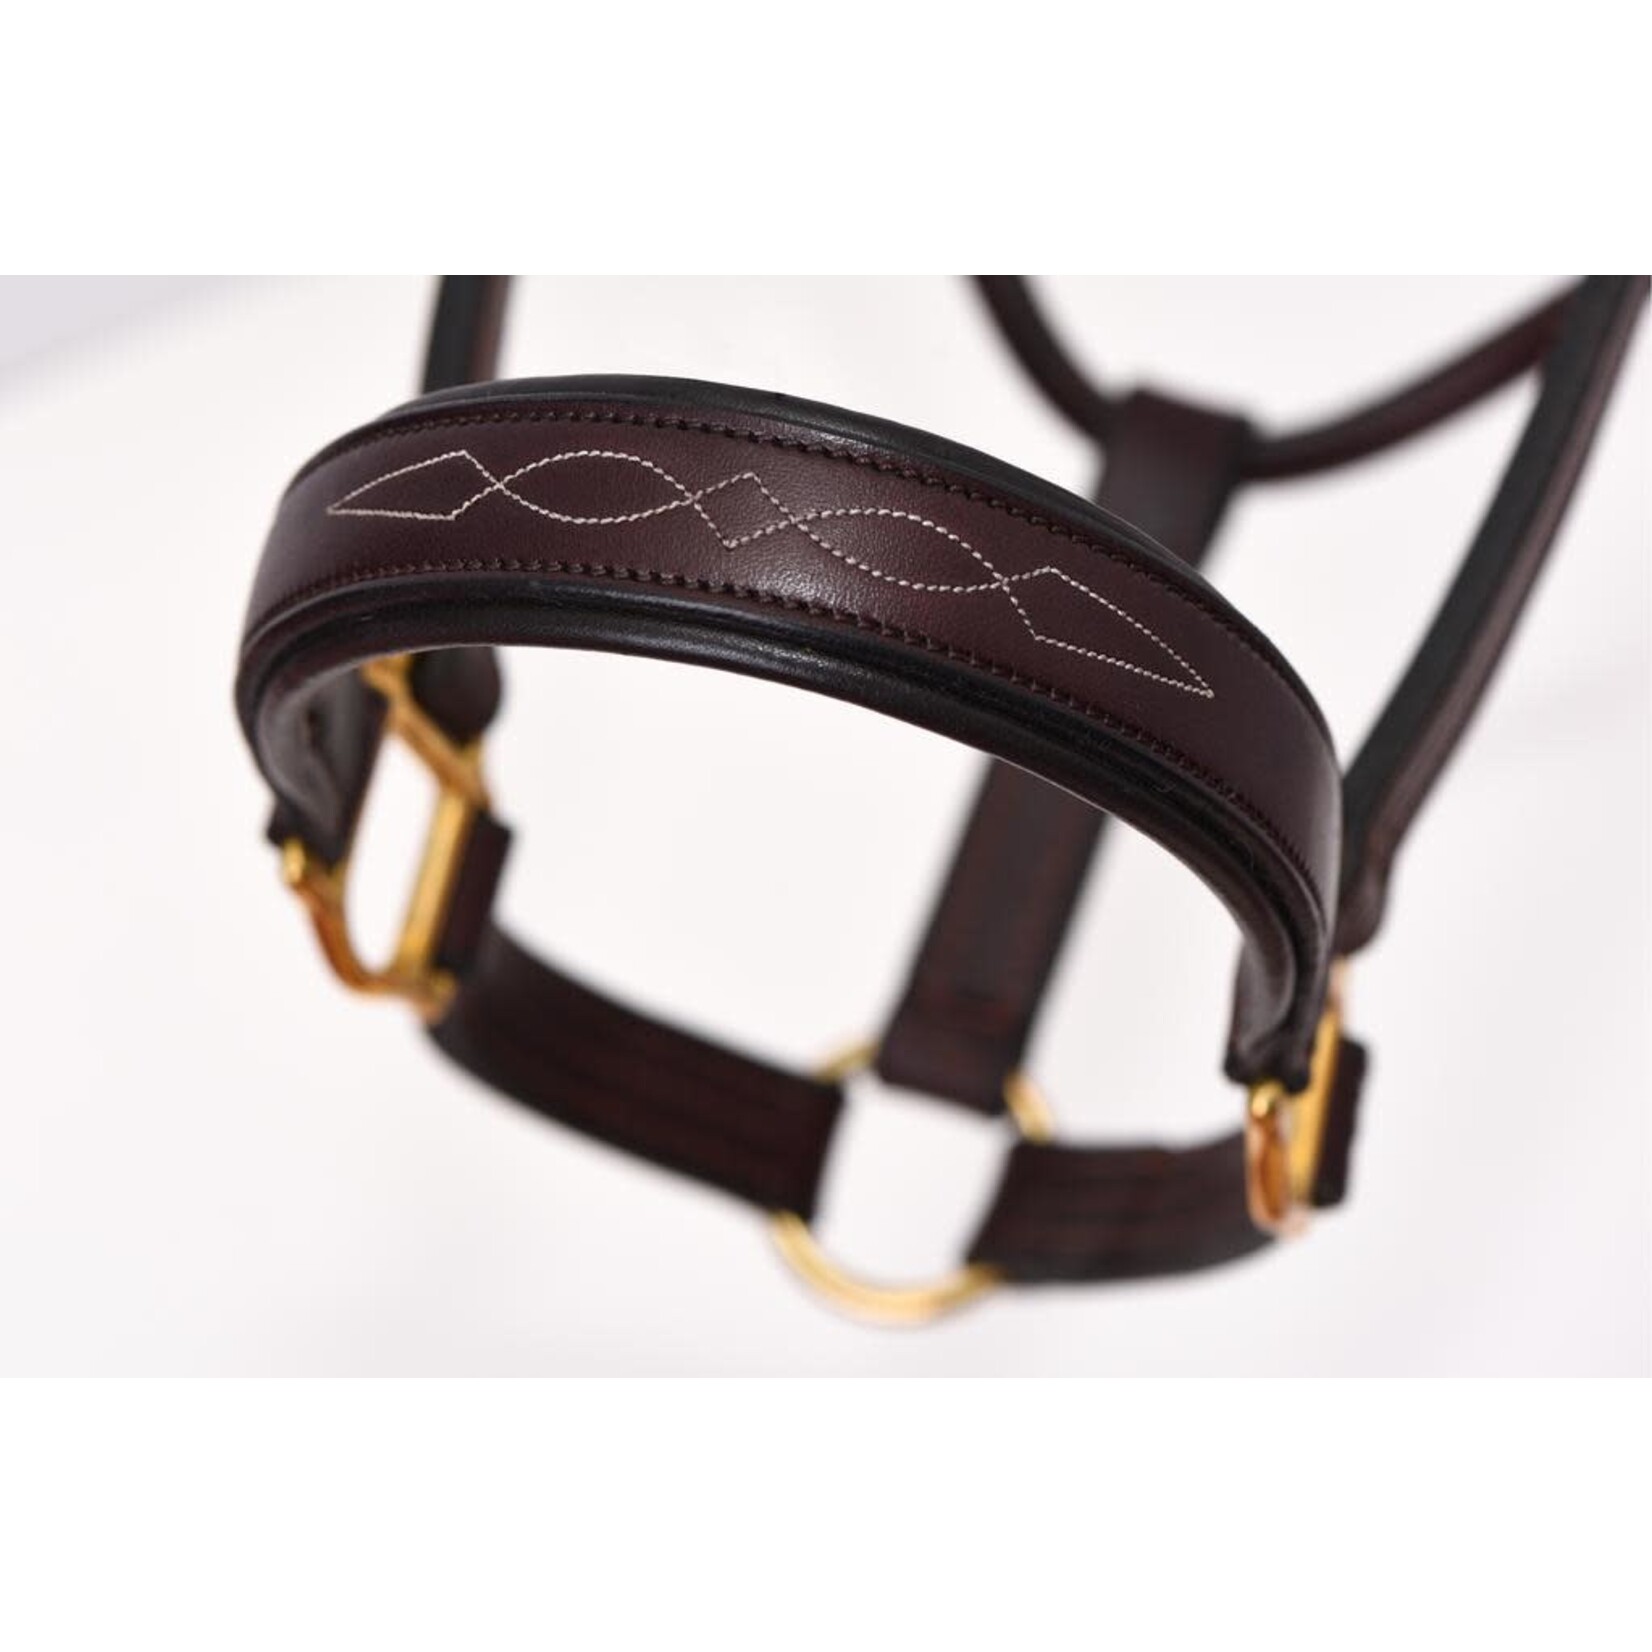 Perri's Fancy Stitched Horse Leather Halter - RIDE